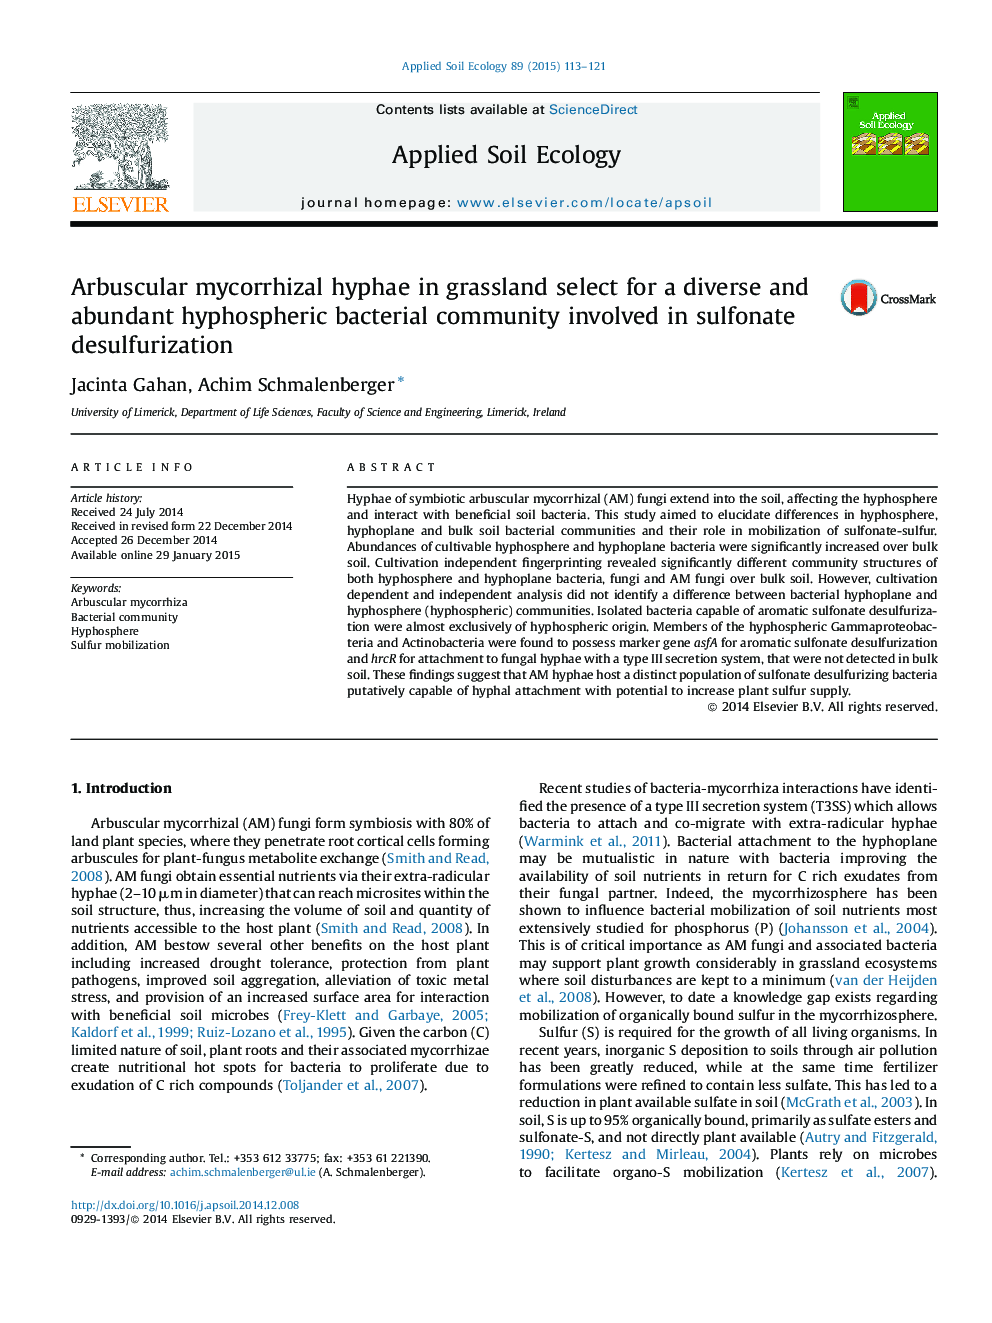 Arbuscular mycorrhizal hyphae in grassland select for a diverse and abundant hyphospheric bacterial community involved in sulfonate desulfurization